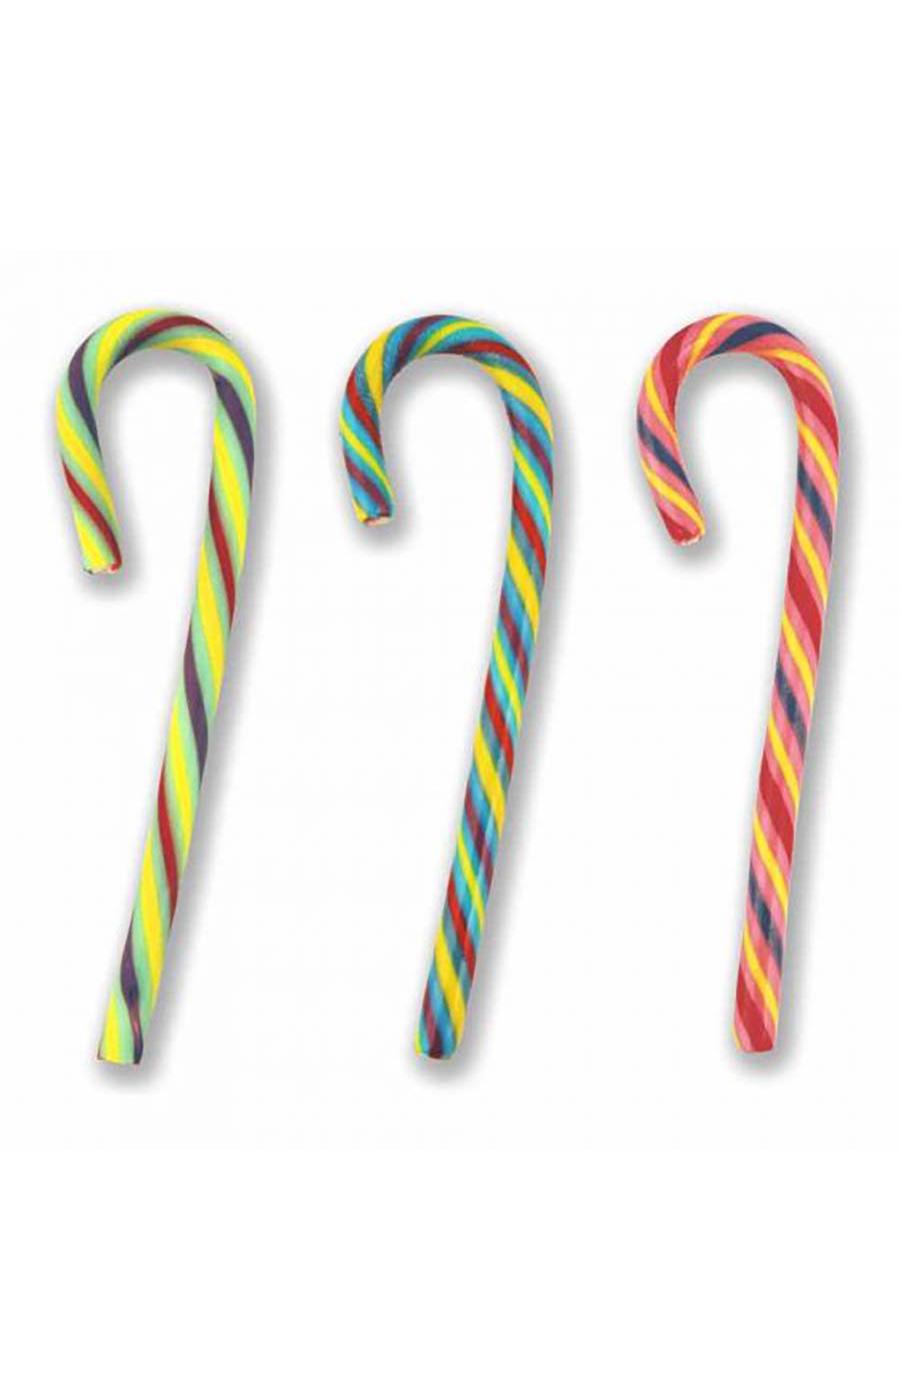 Dum Dums Assorted Flavor Candy Canes; image 2 of 2